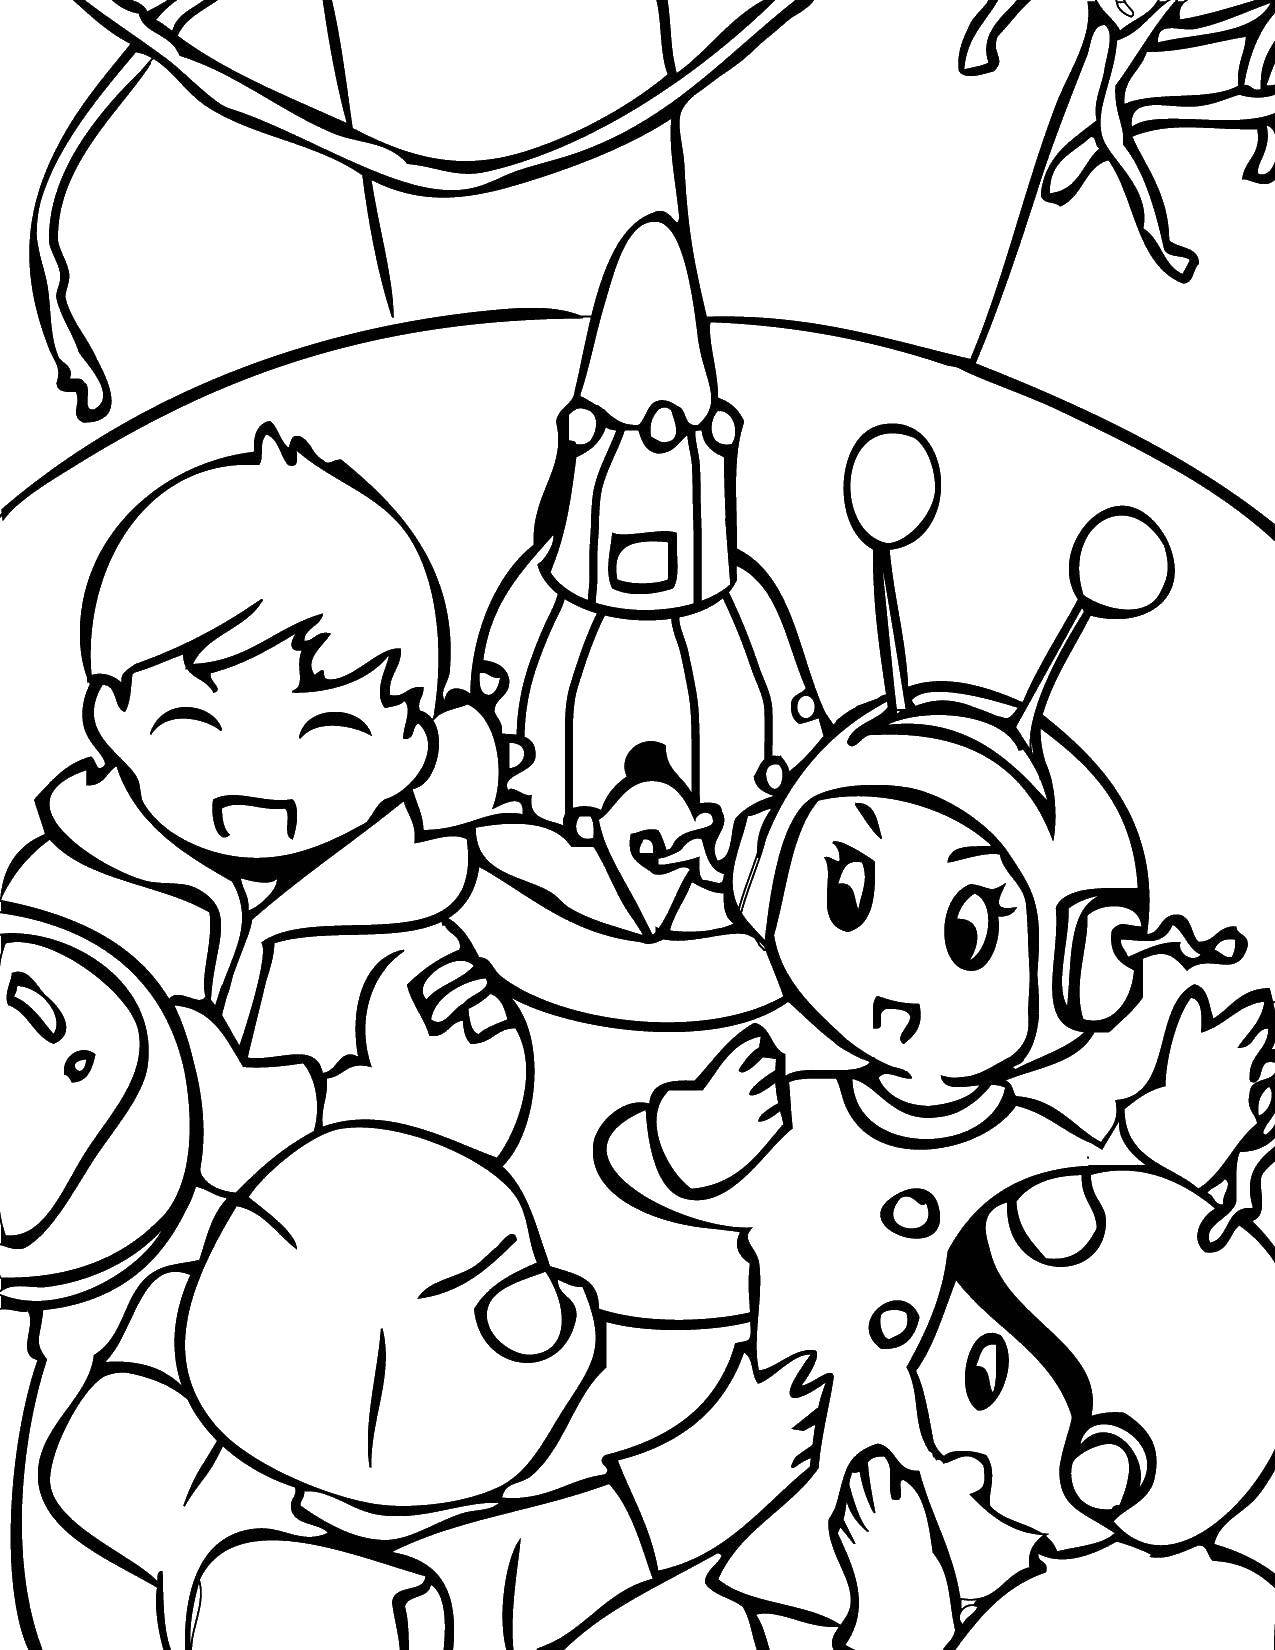 Coloring Alien in space. Category space. Tags:  Space, aliens, stars.